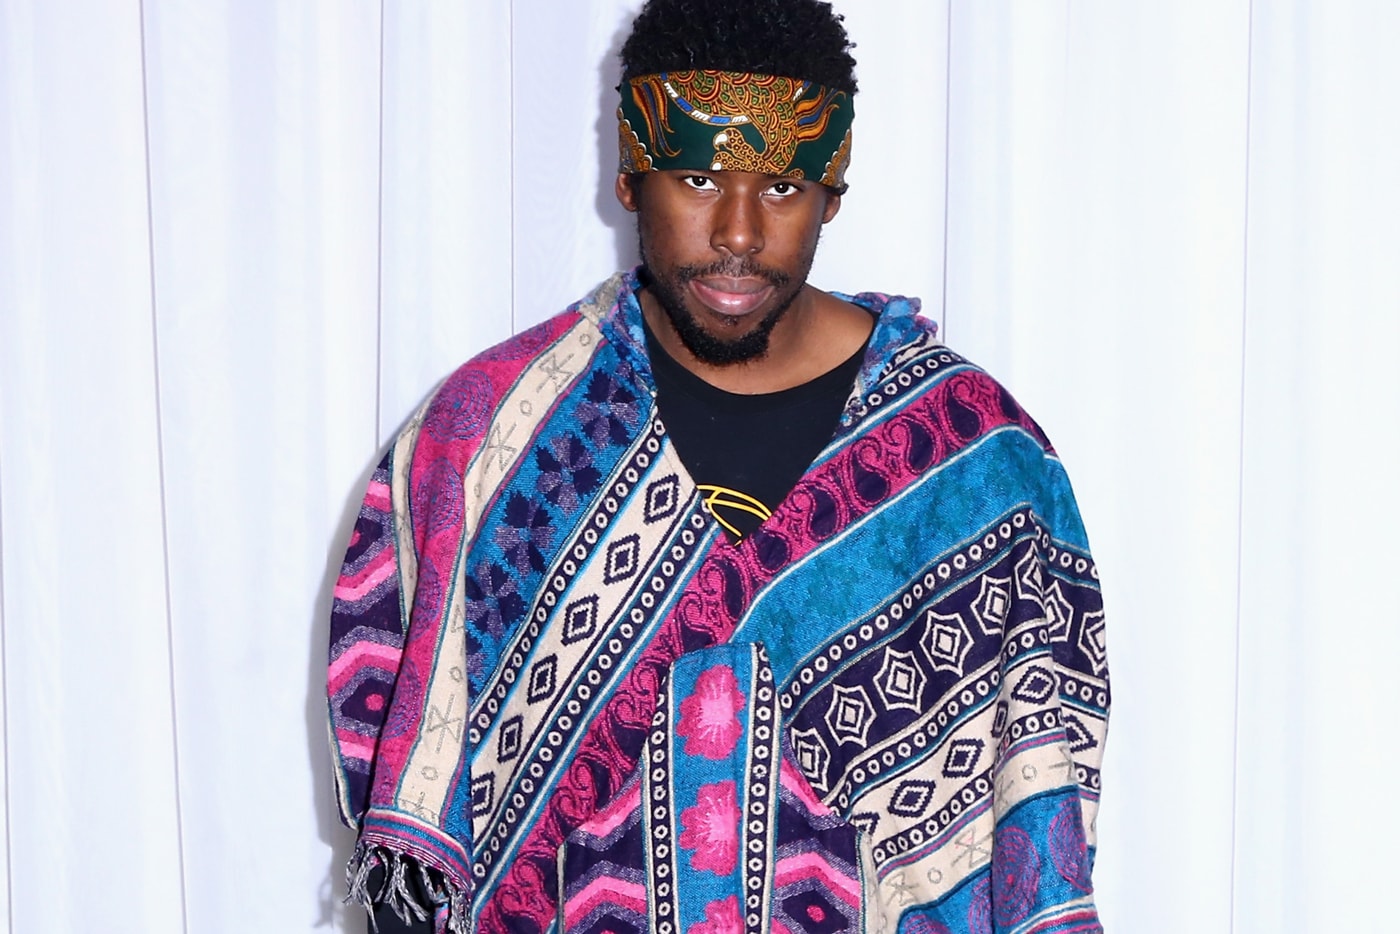 Listen to Flying Lotus, Rick Rubin and Baauer's 'Star Wars' Songs